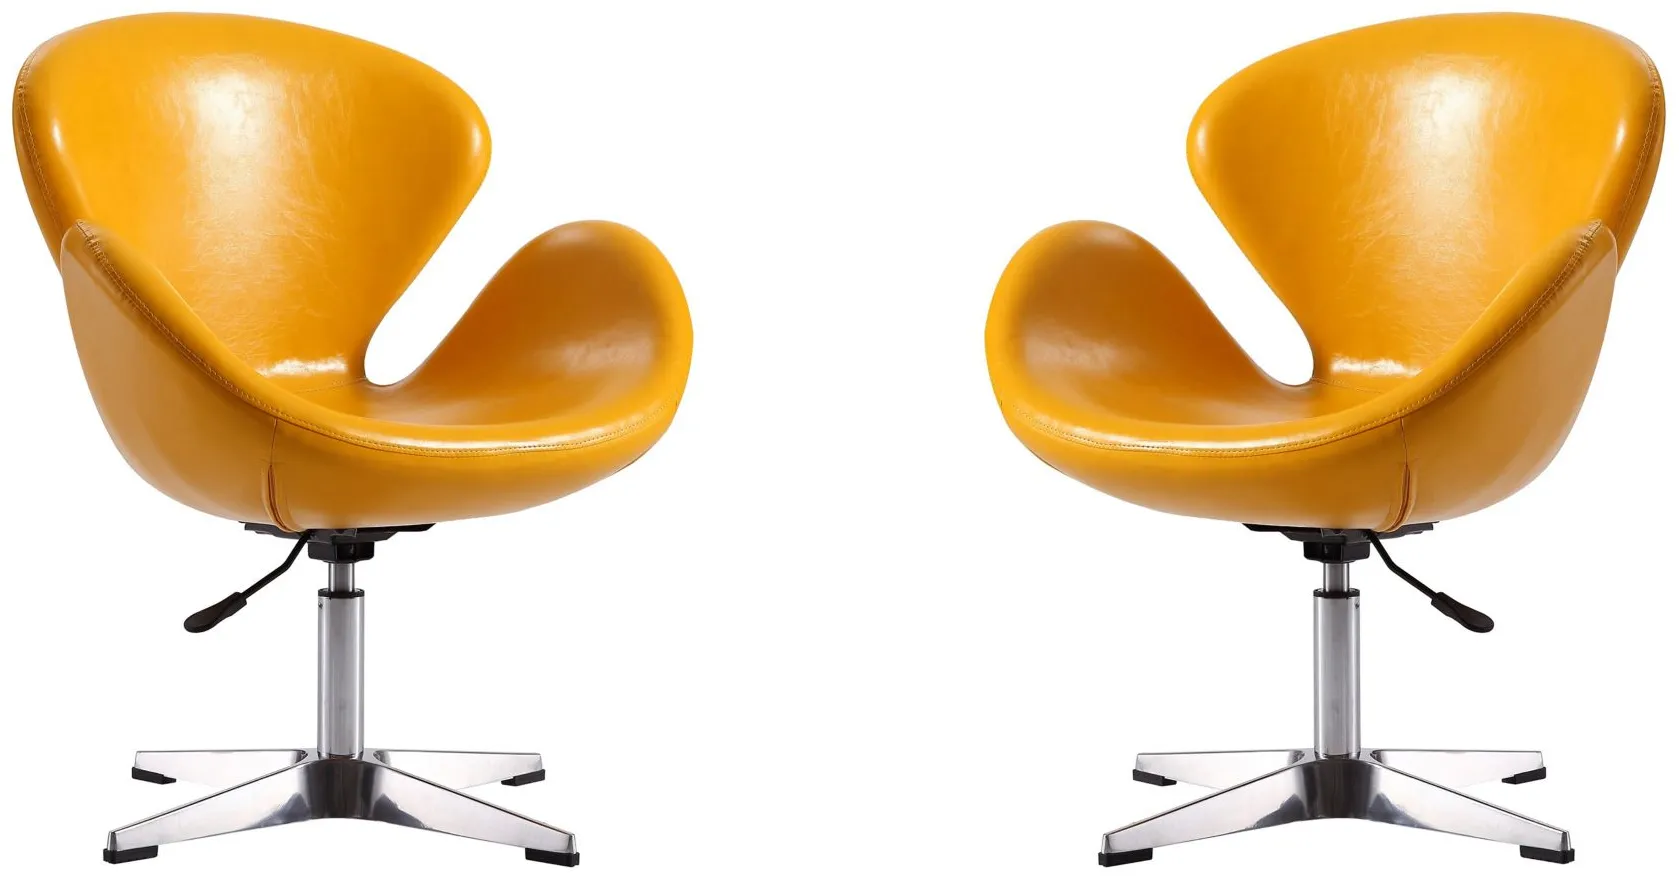 Raspberry Adjustable Swivel Chair (Set of 2) in Yellow and Polished Chrome by Manhattan Comfort